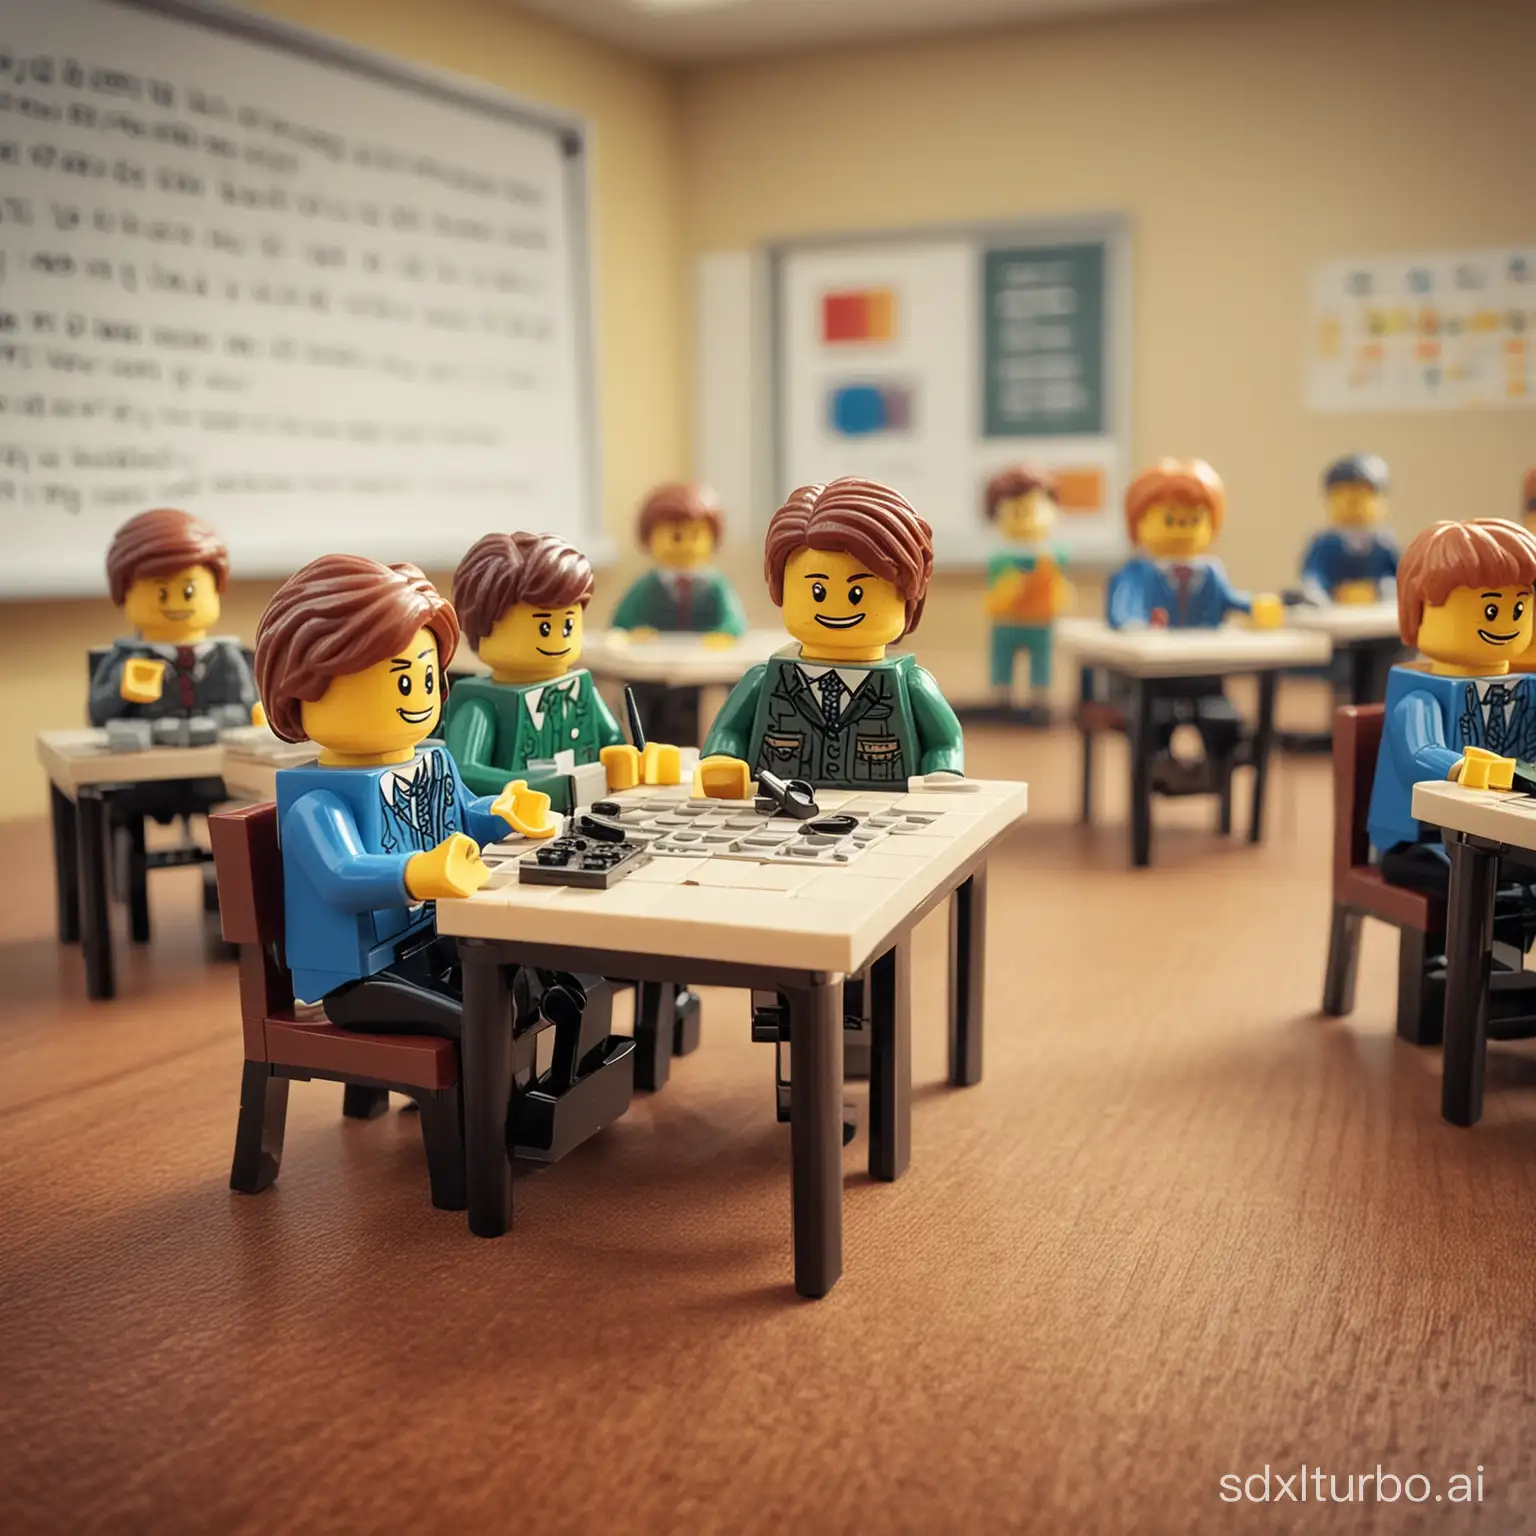 Lego figures in a classroom situation. Happy to learn mathematics.